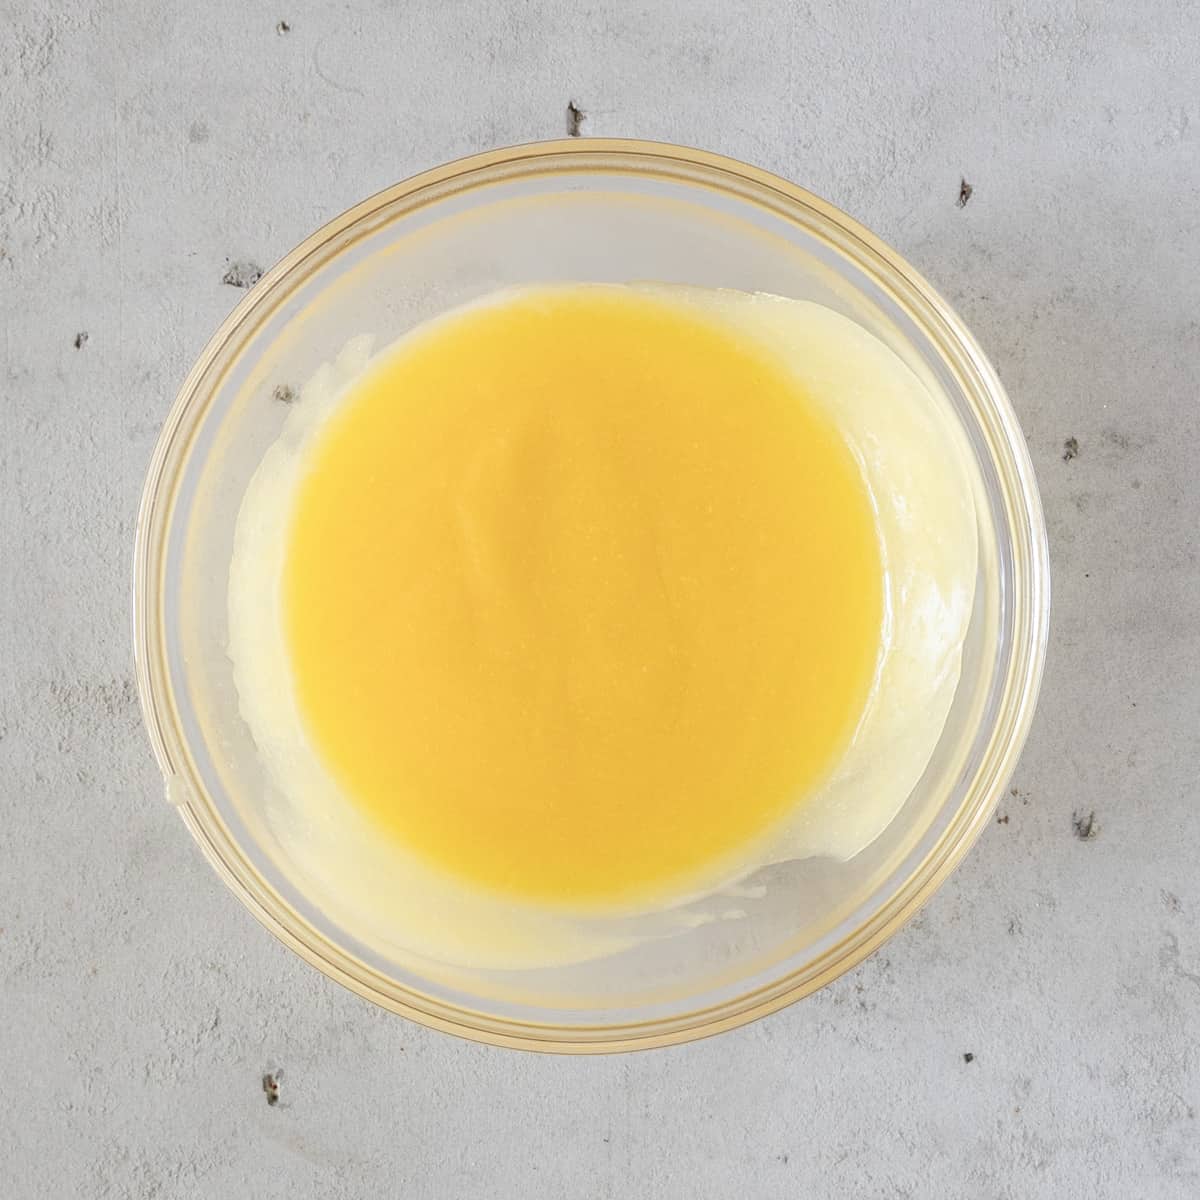 the lime curd in a glass bowl on a grey background.